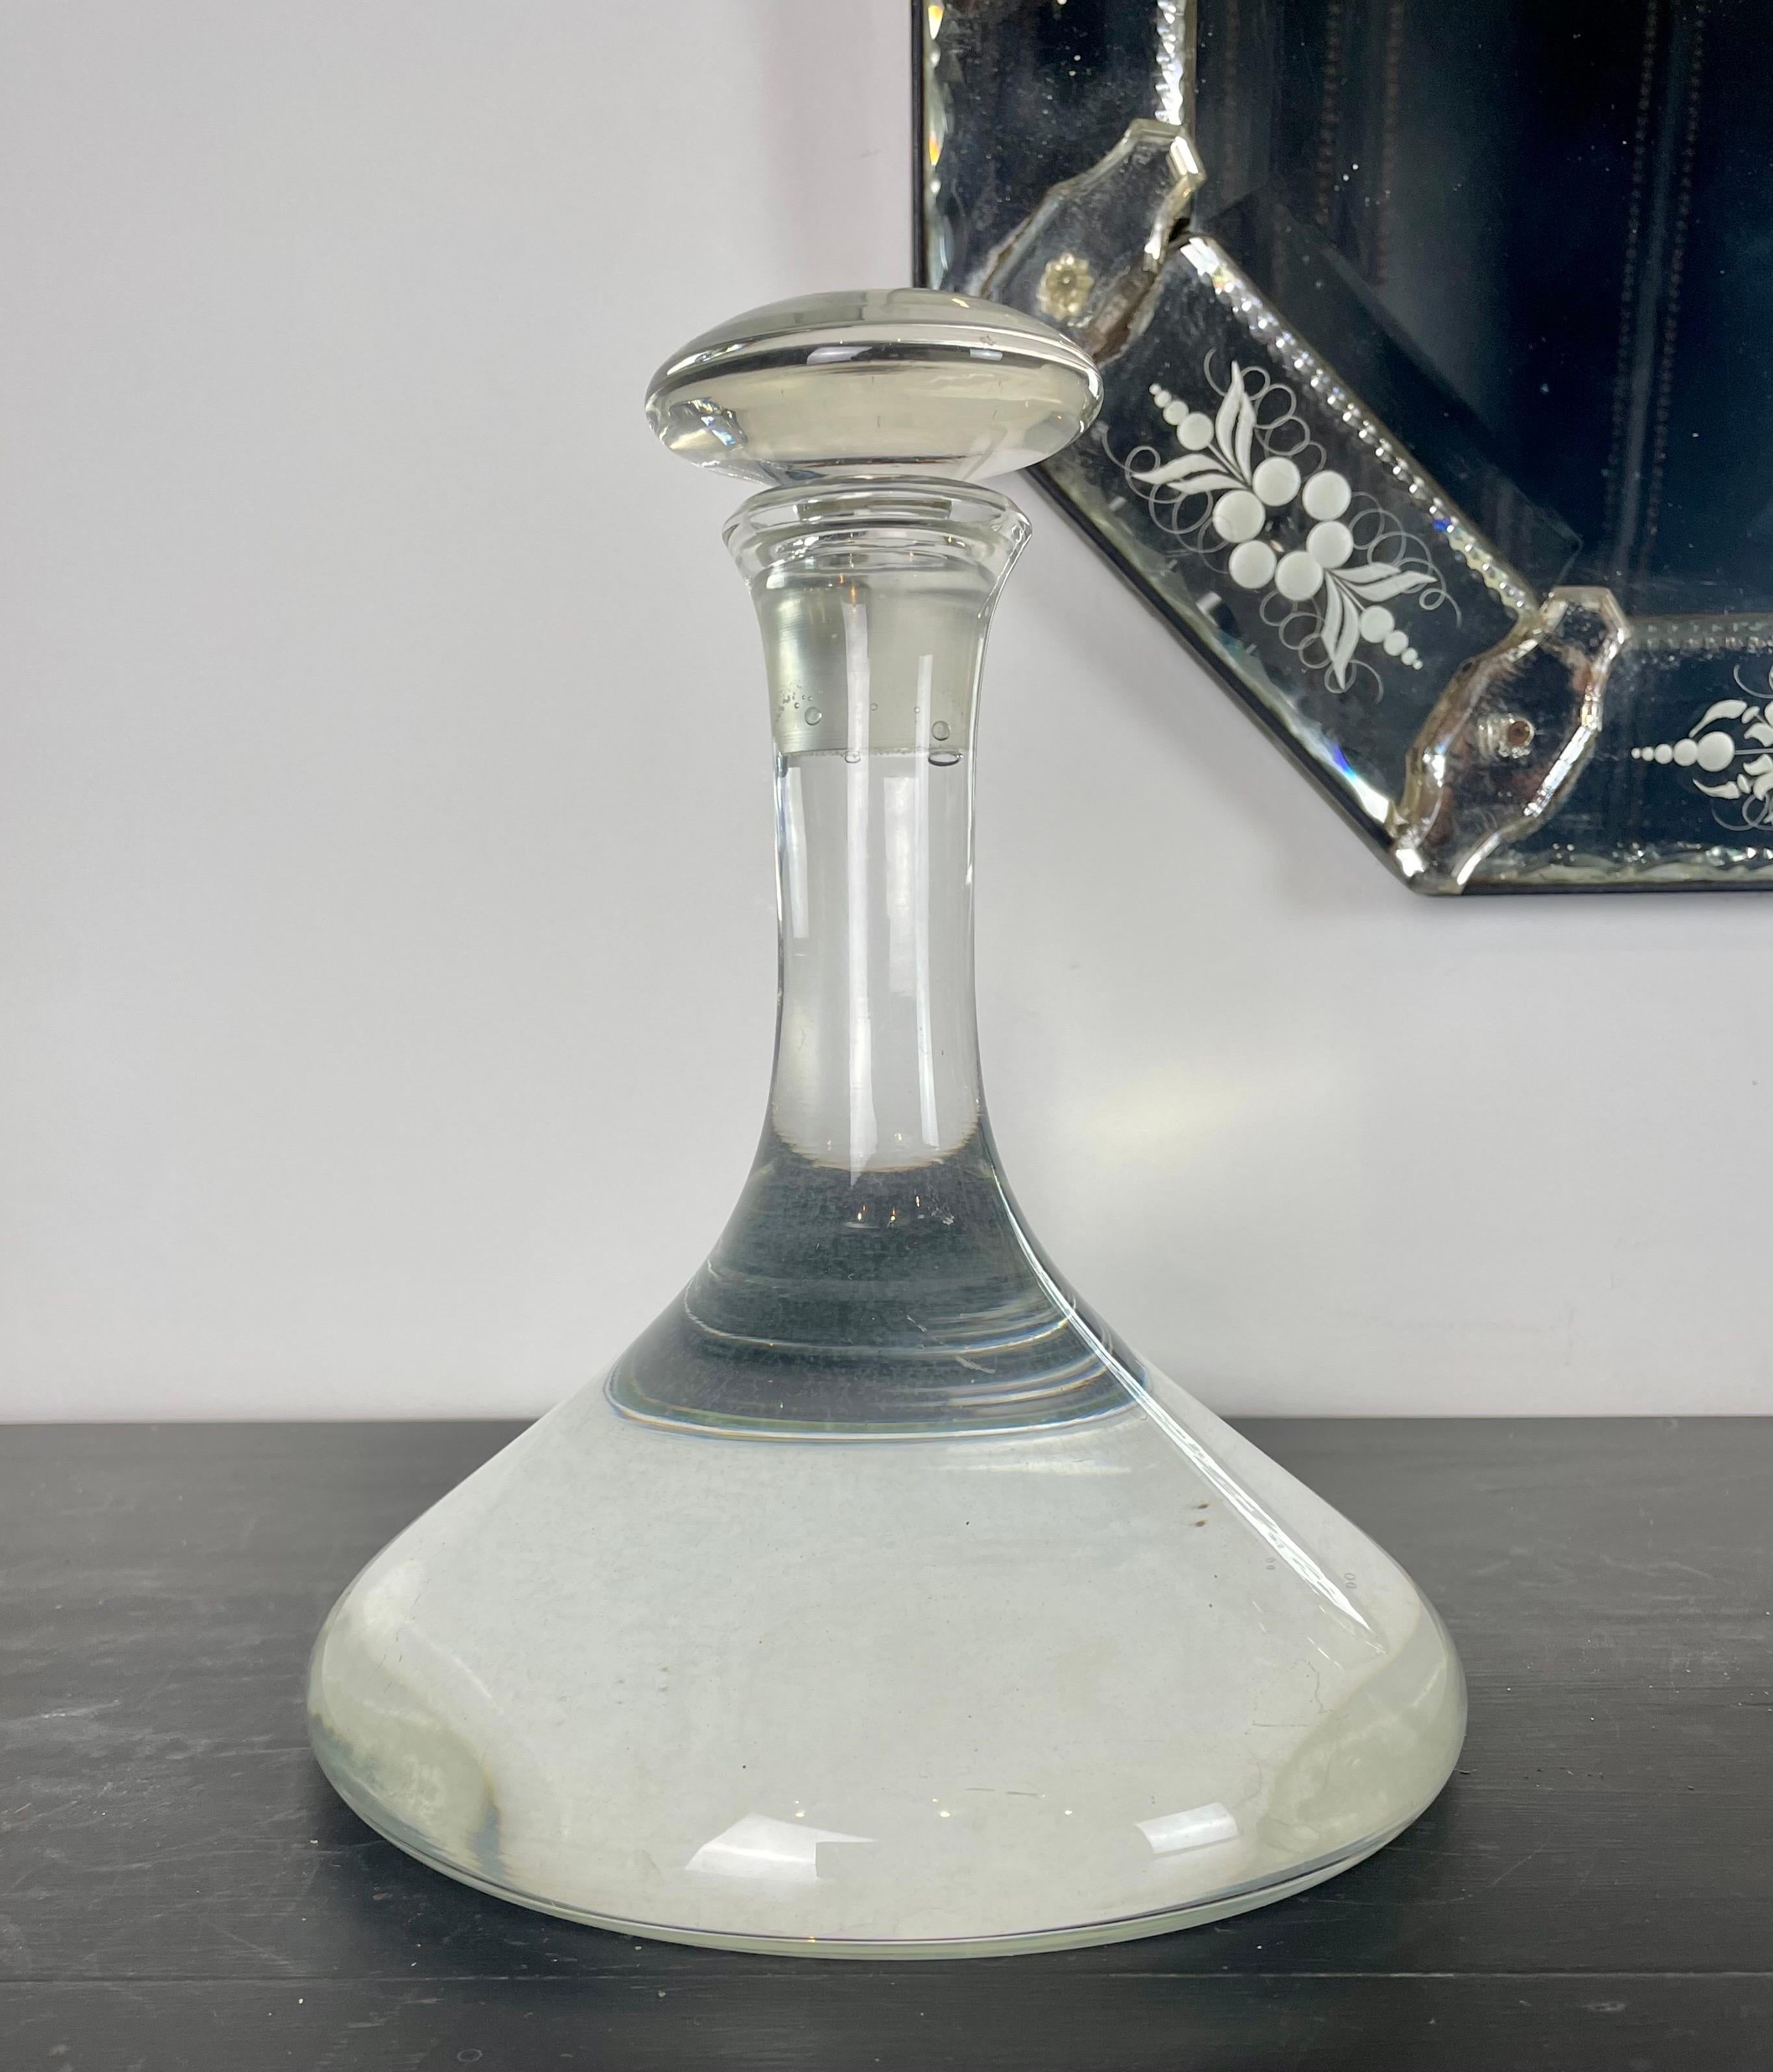 Very pretty French Captain glass carafe with its glass stopper. The bottom of the cap is frosted glass.
Mouth blown glass. nice French work from the middle of the 20th century.
The carafe has a wide flat bottom and a generous shape.
This decanter